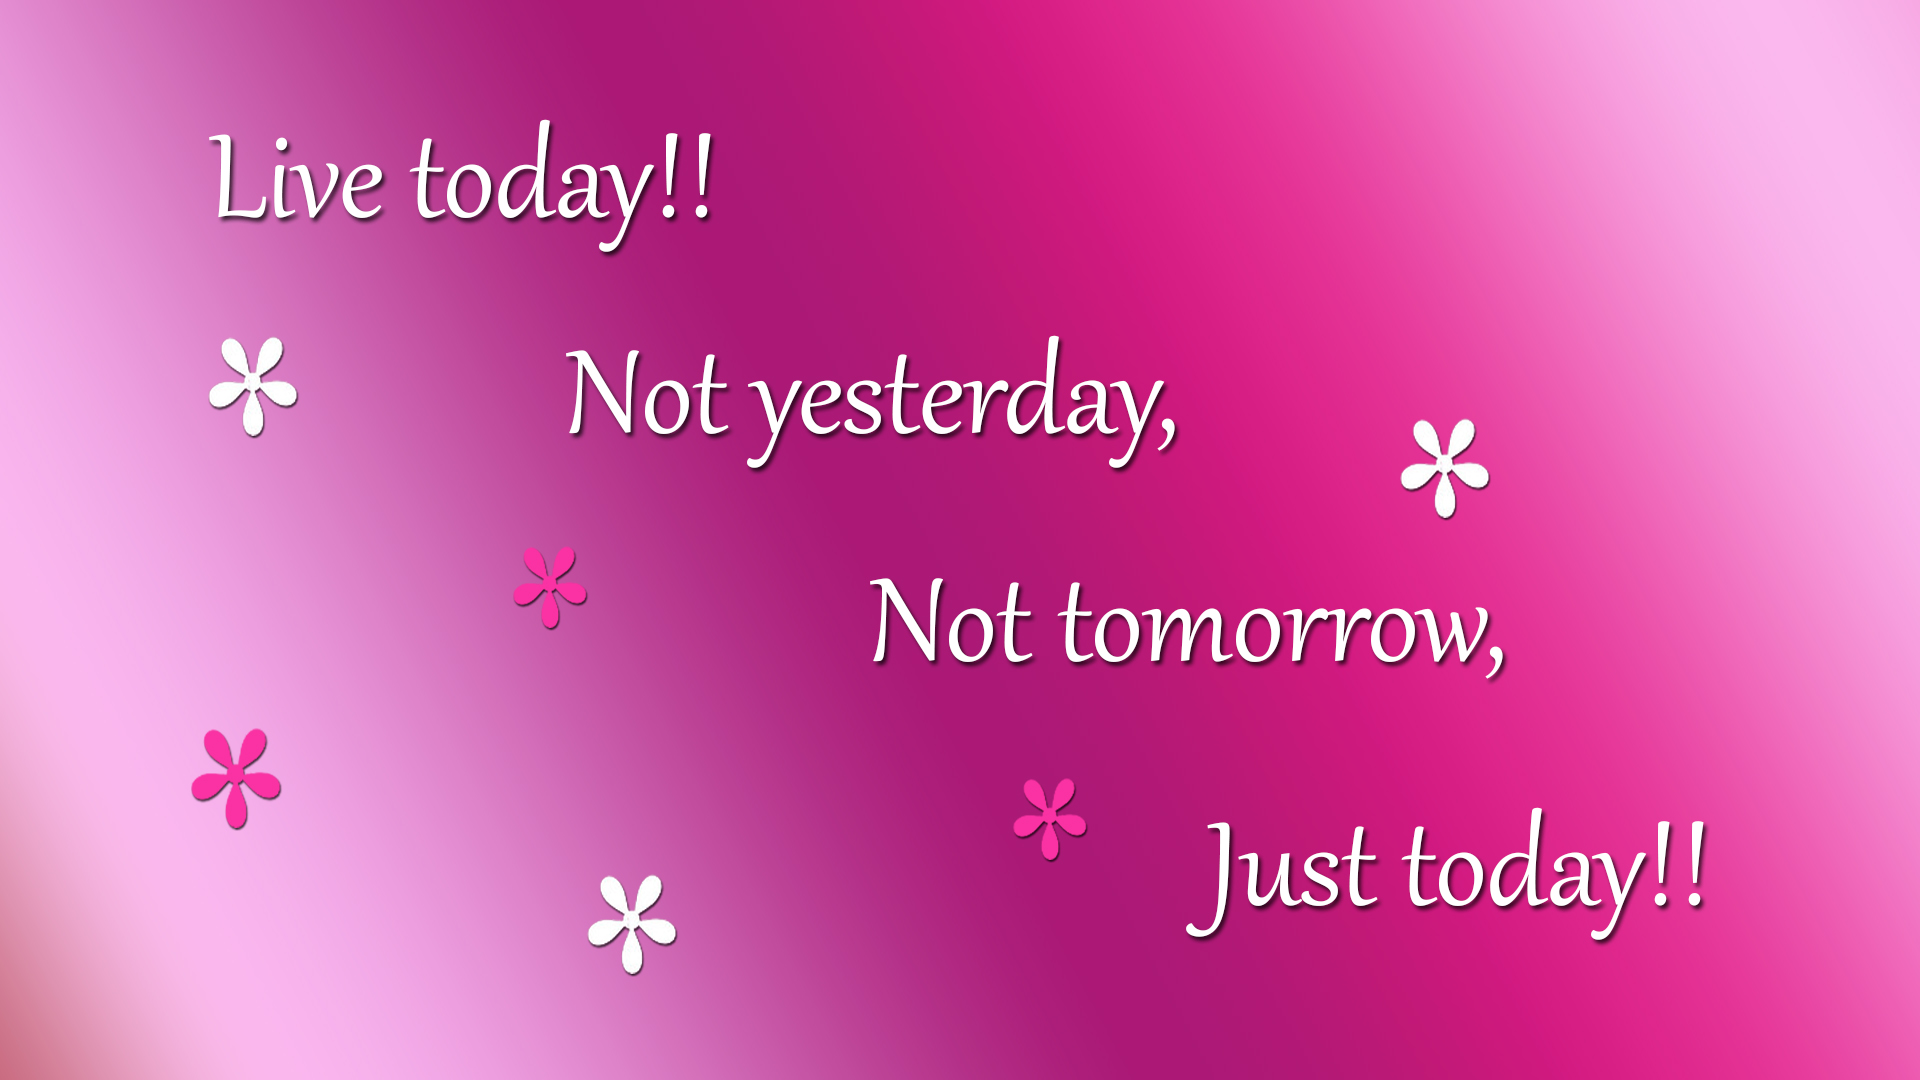 Not yesterday. Live today. Yesterday is not today